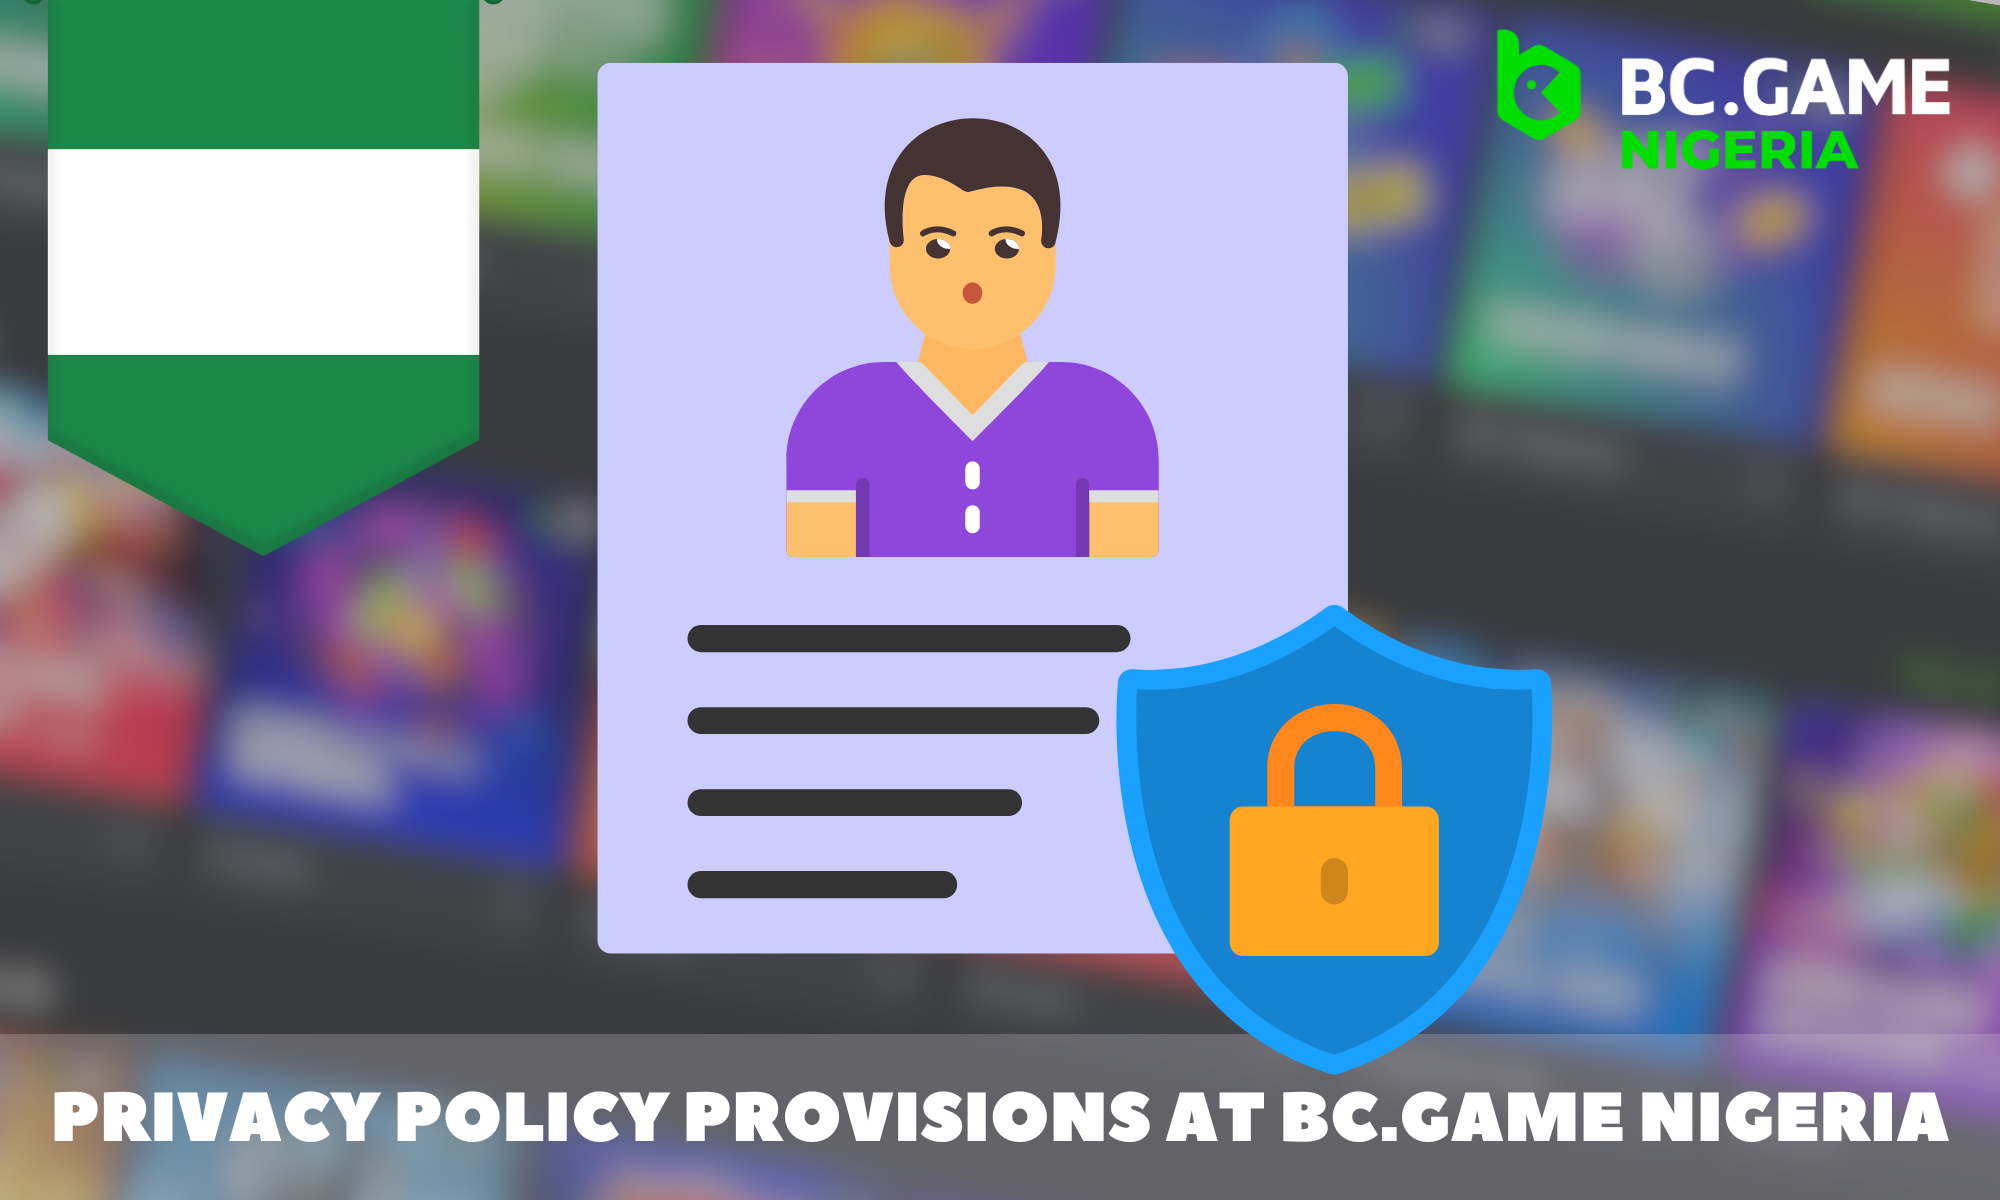 BC.GAME Nigeria protects users' personal data and adheres to the privacy policy